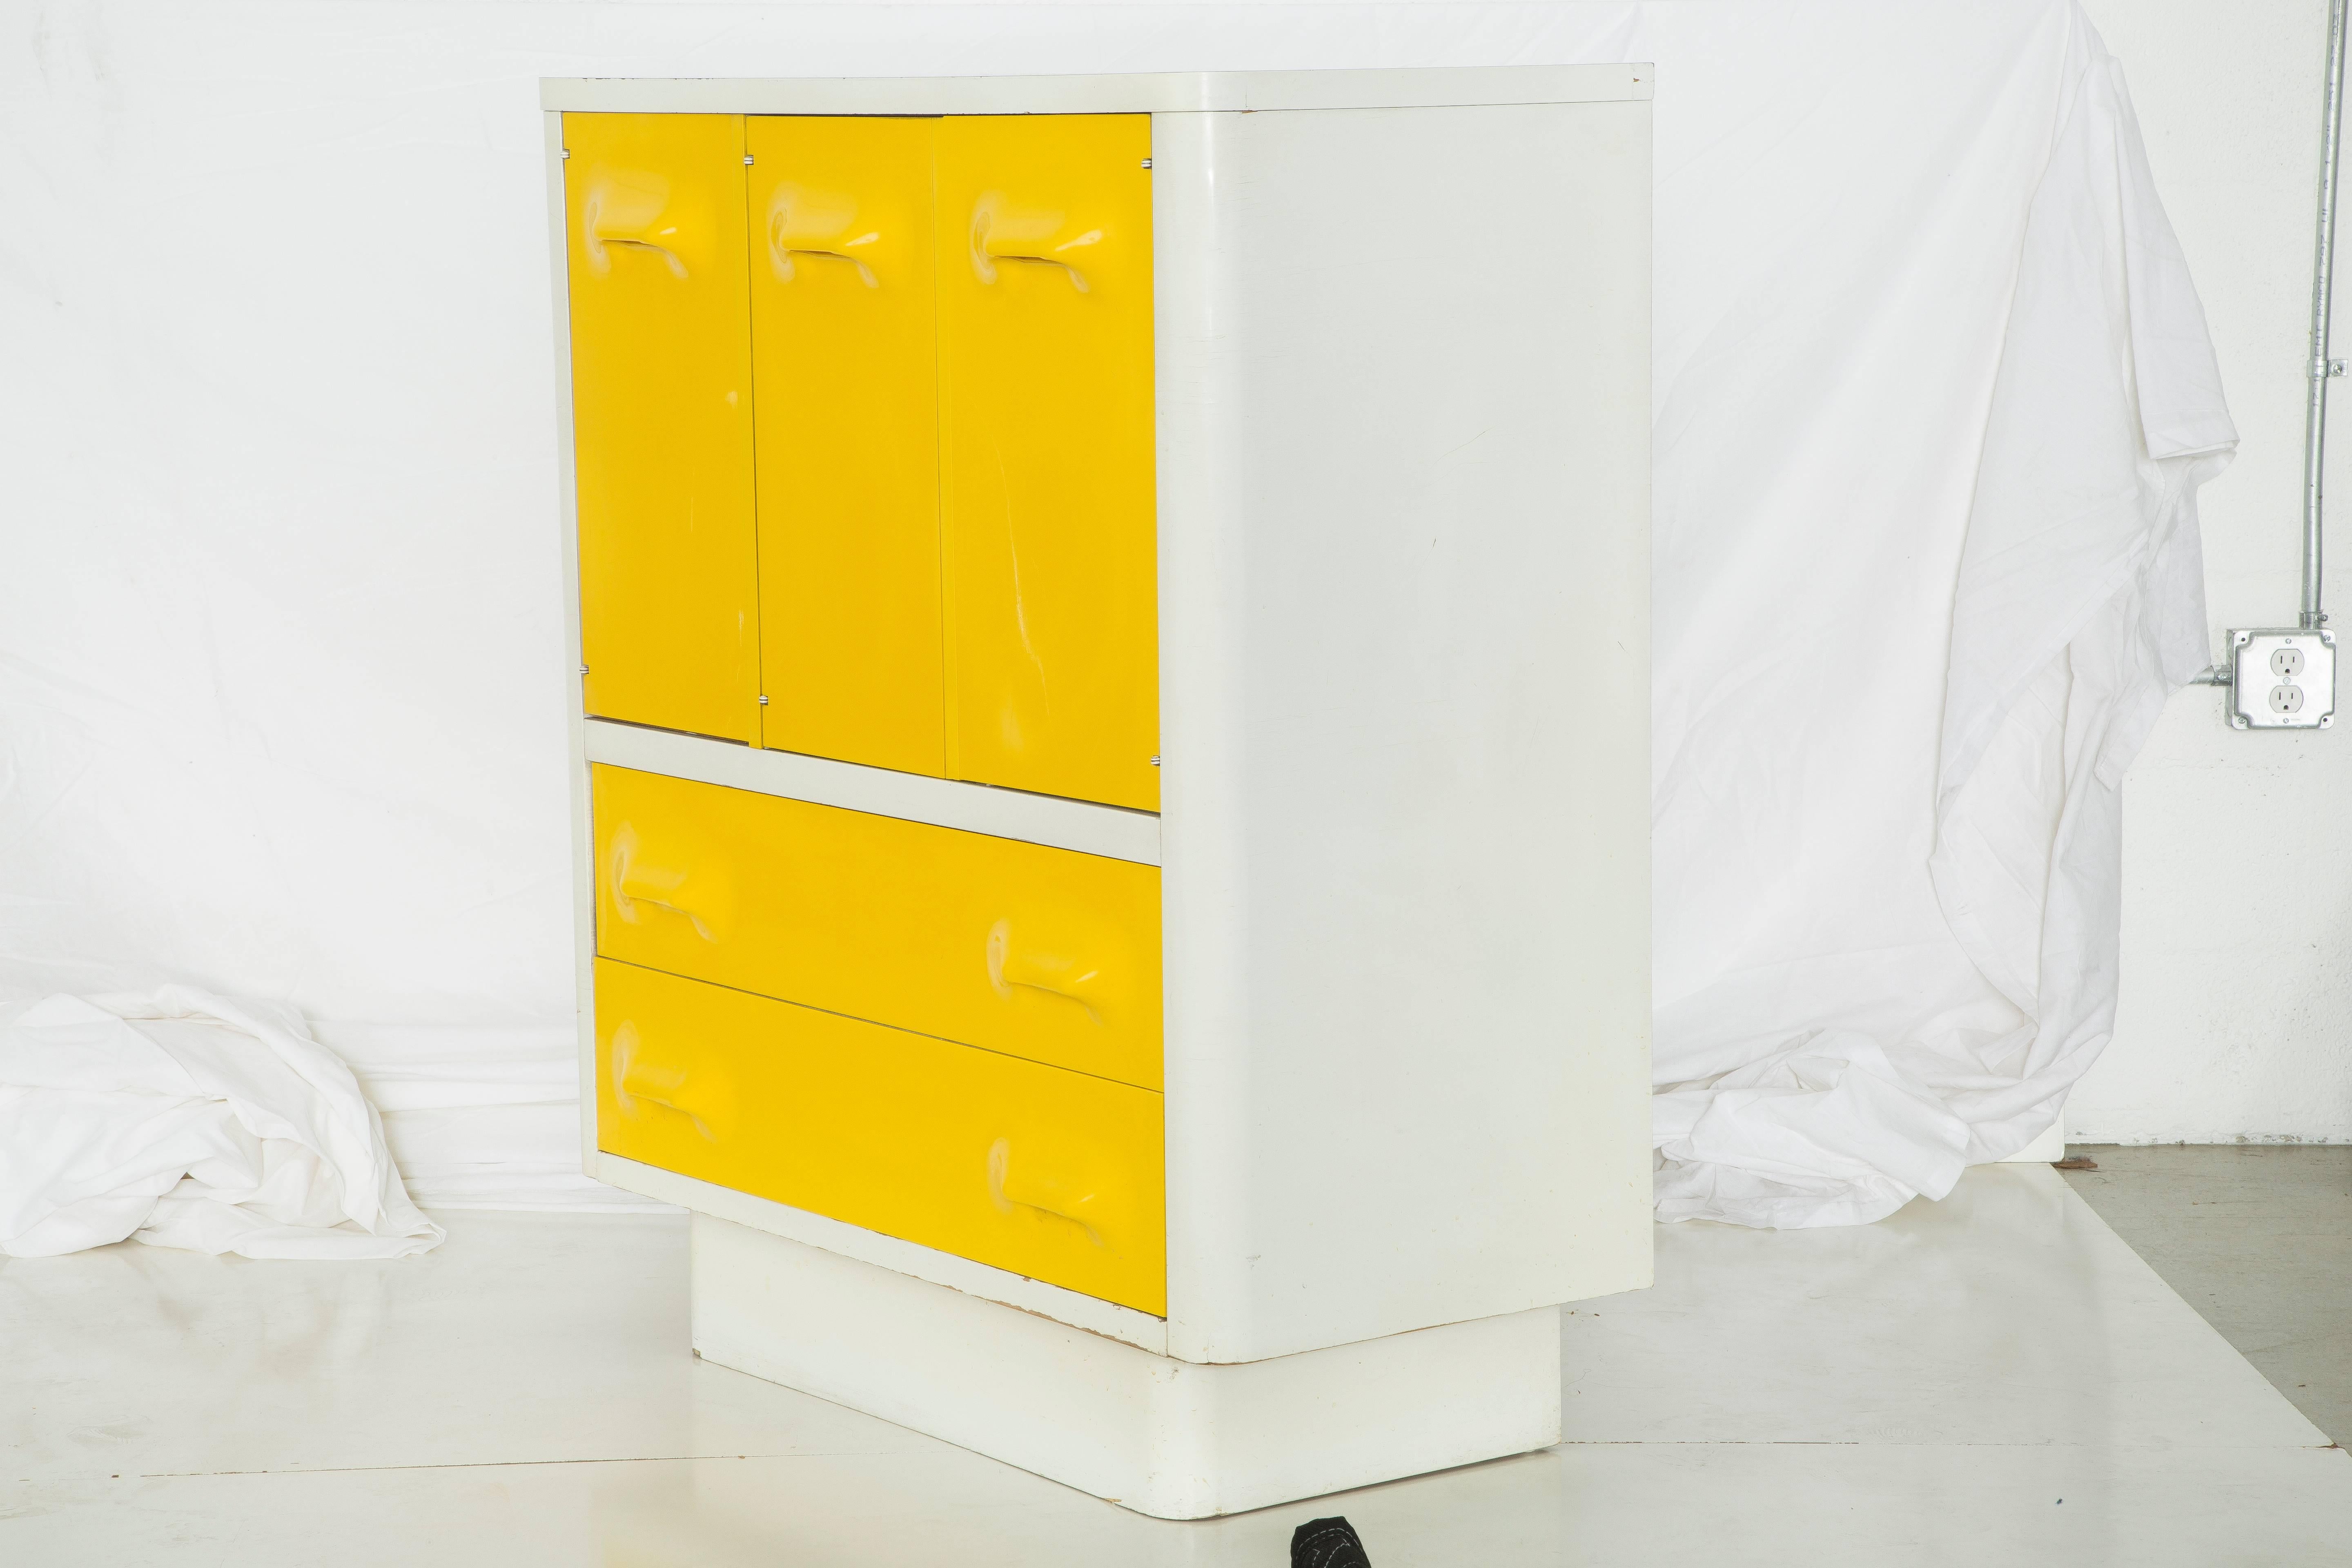 White and yellow Broyhill Chapter One Series dresser in the style of Raymond Loewy Mod-Pop Industrial Design, circa 1970s. The white body of the credenza is lacquered wood, and the vibrant yellow drawers are molded plastic. Three top cabinet doors -